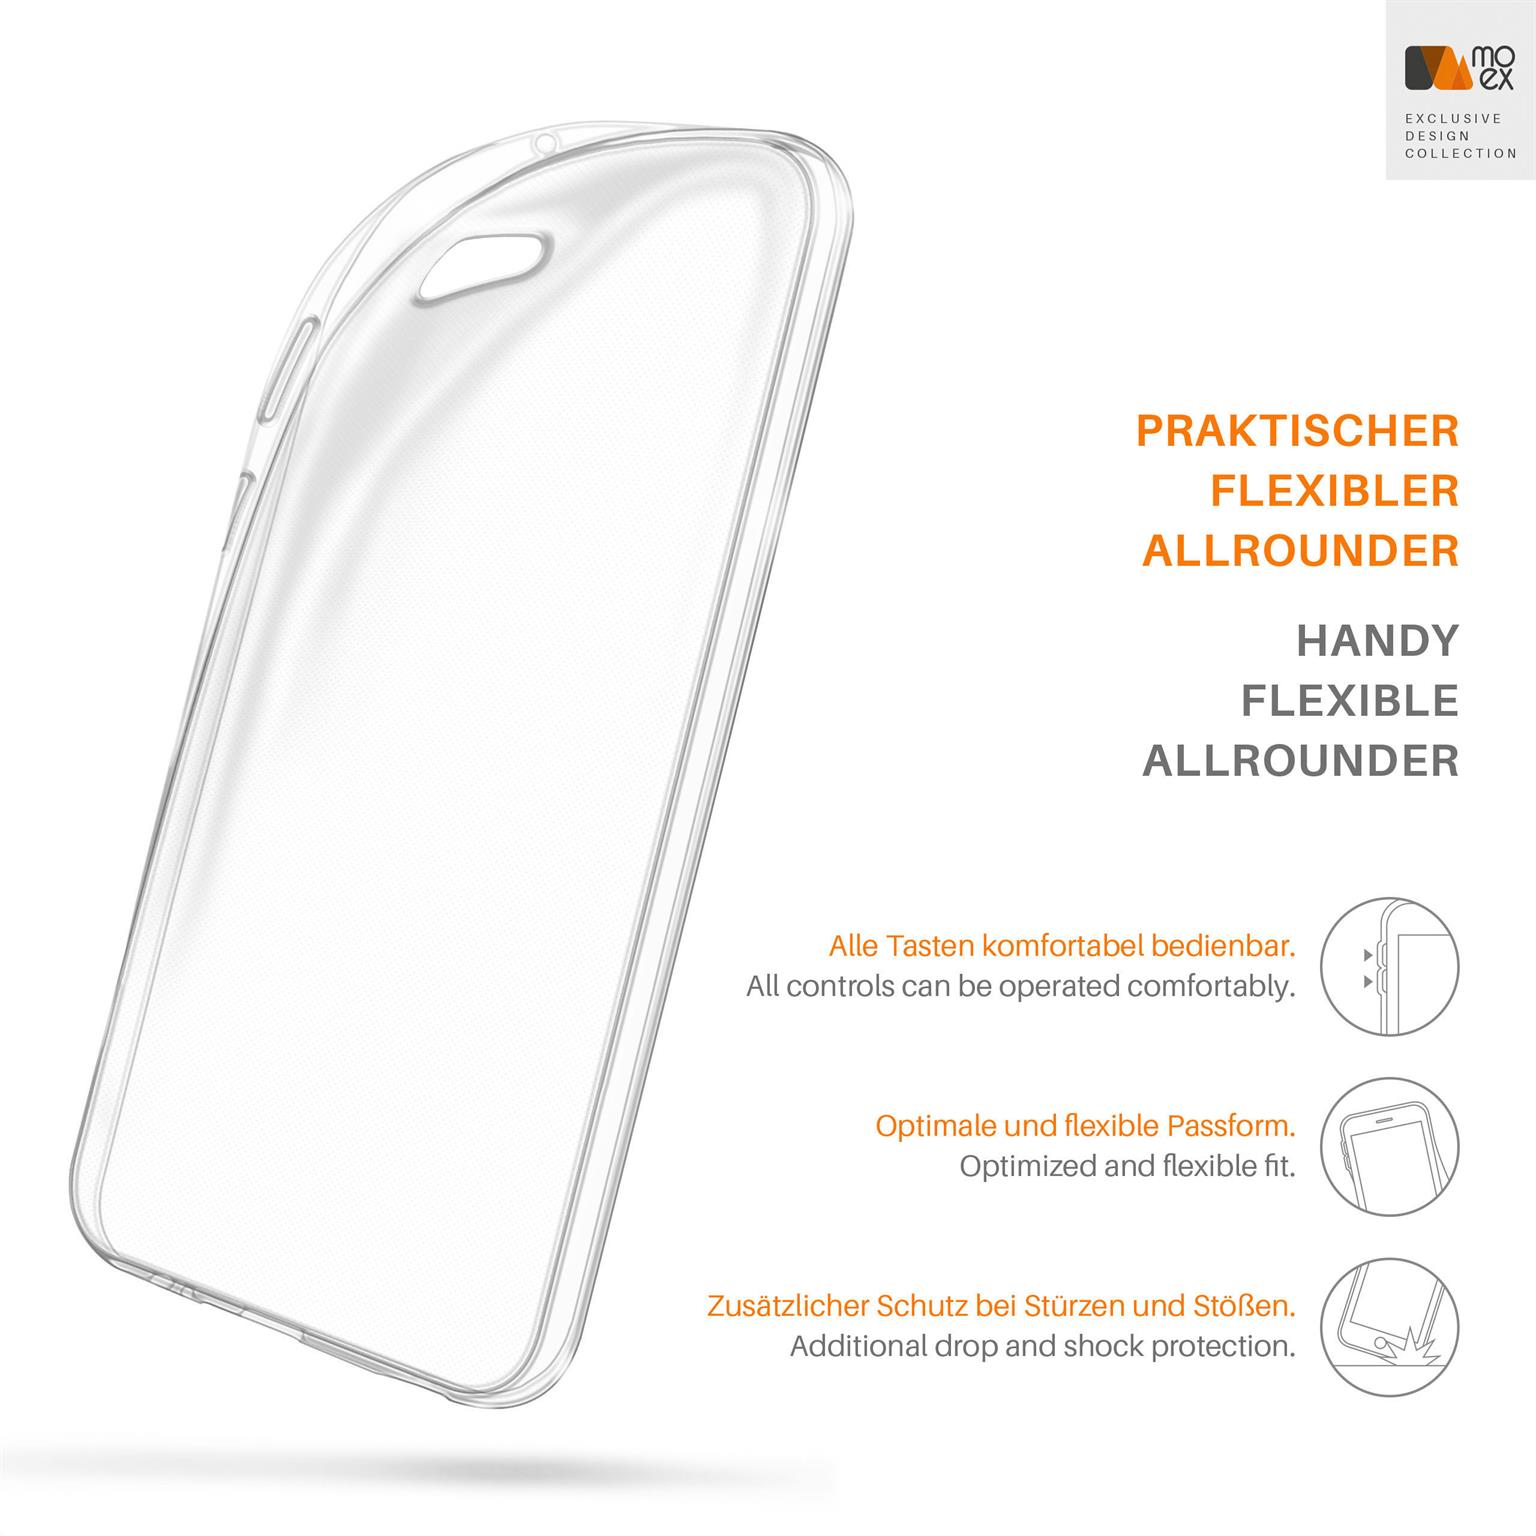 MOEX Aero Case, Crystal-Clear Desire HTC, 12, Backcover